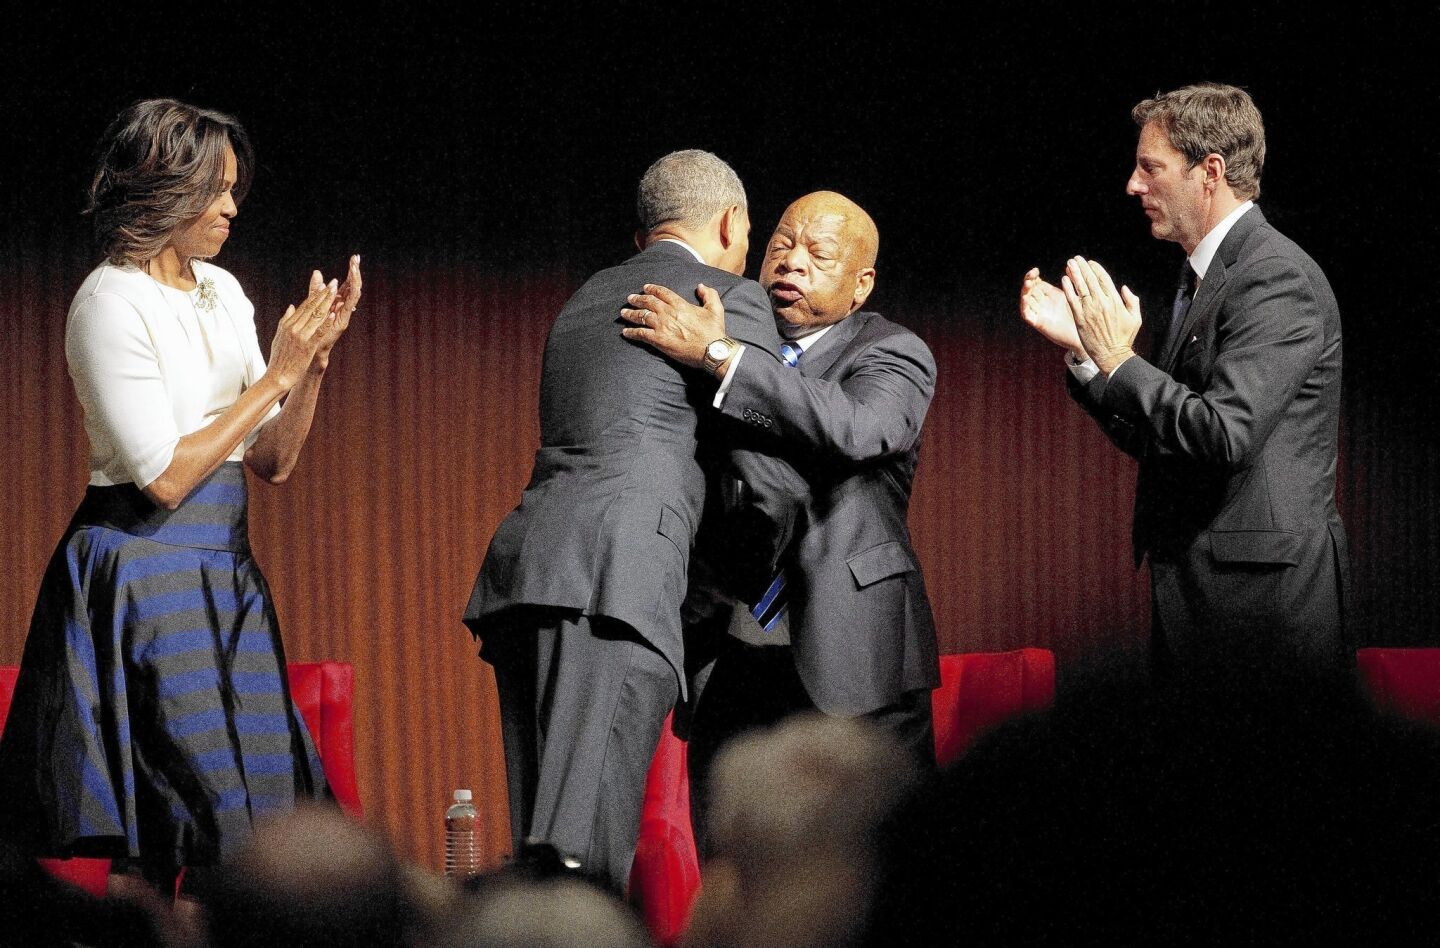 President Obama hugs Rep. John Lewis on stage at a civil rights event